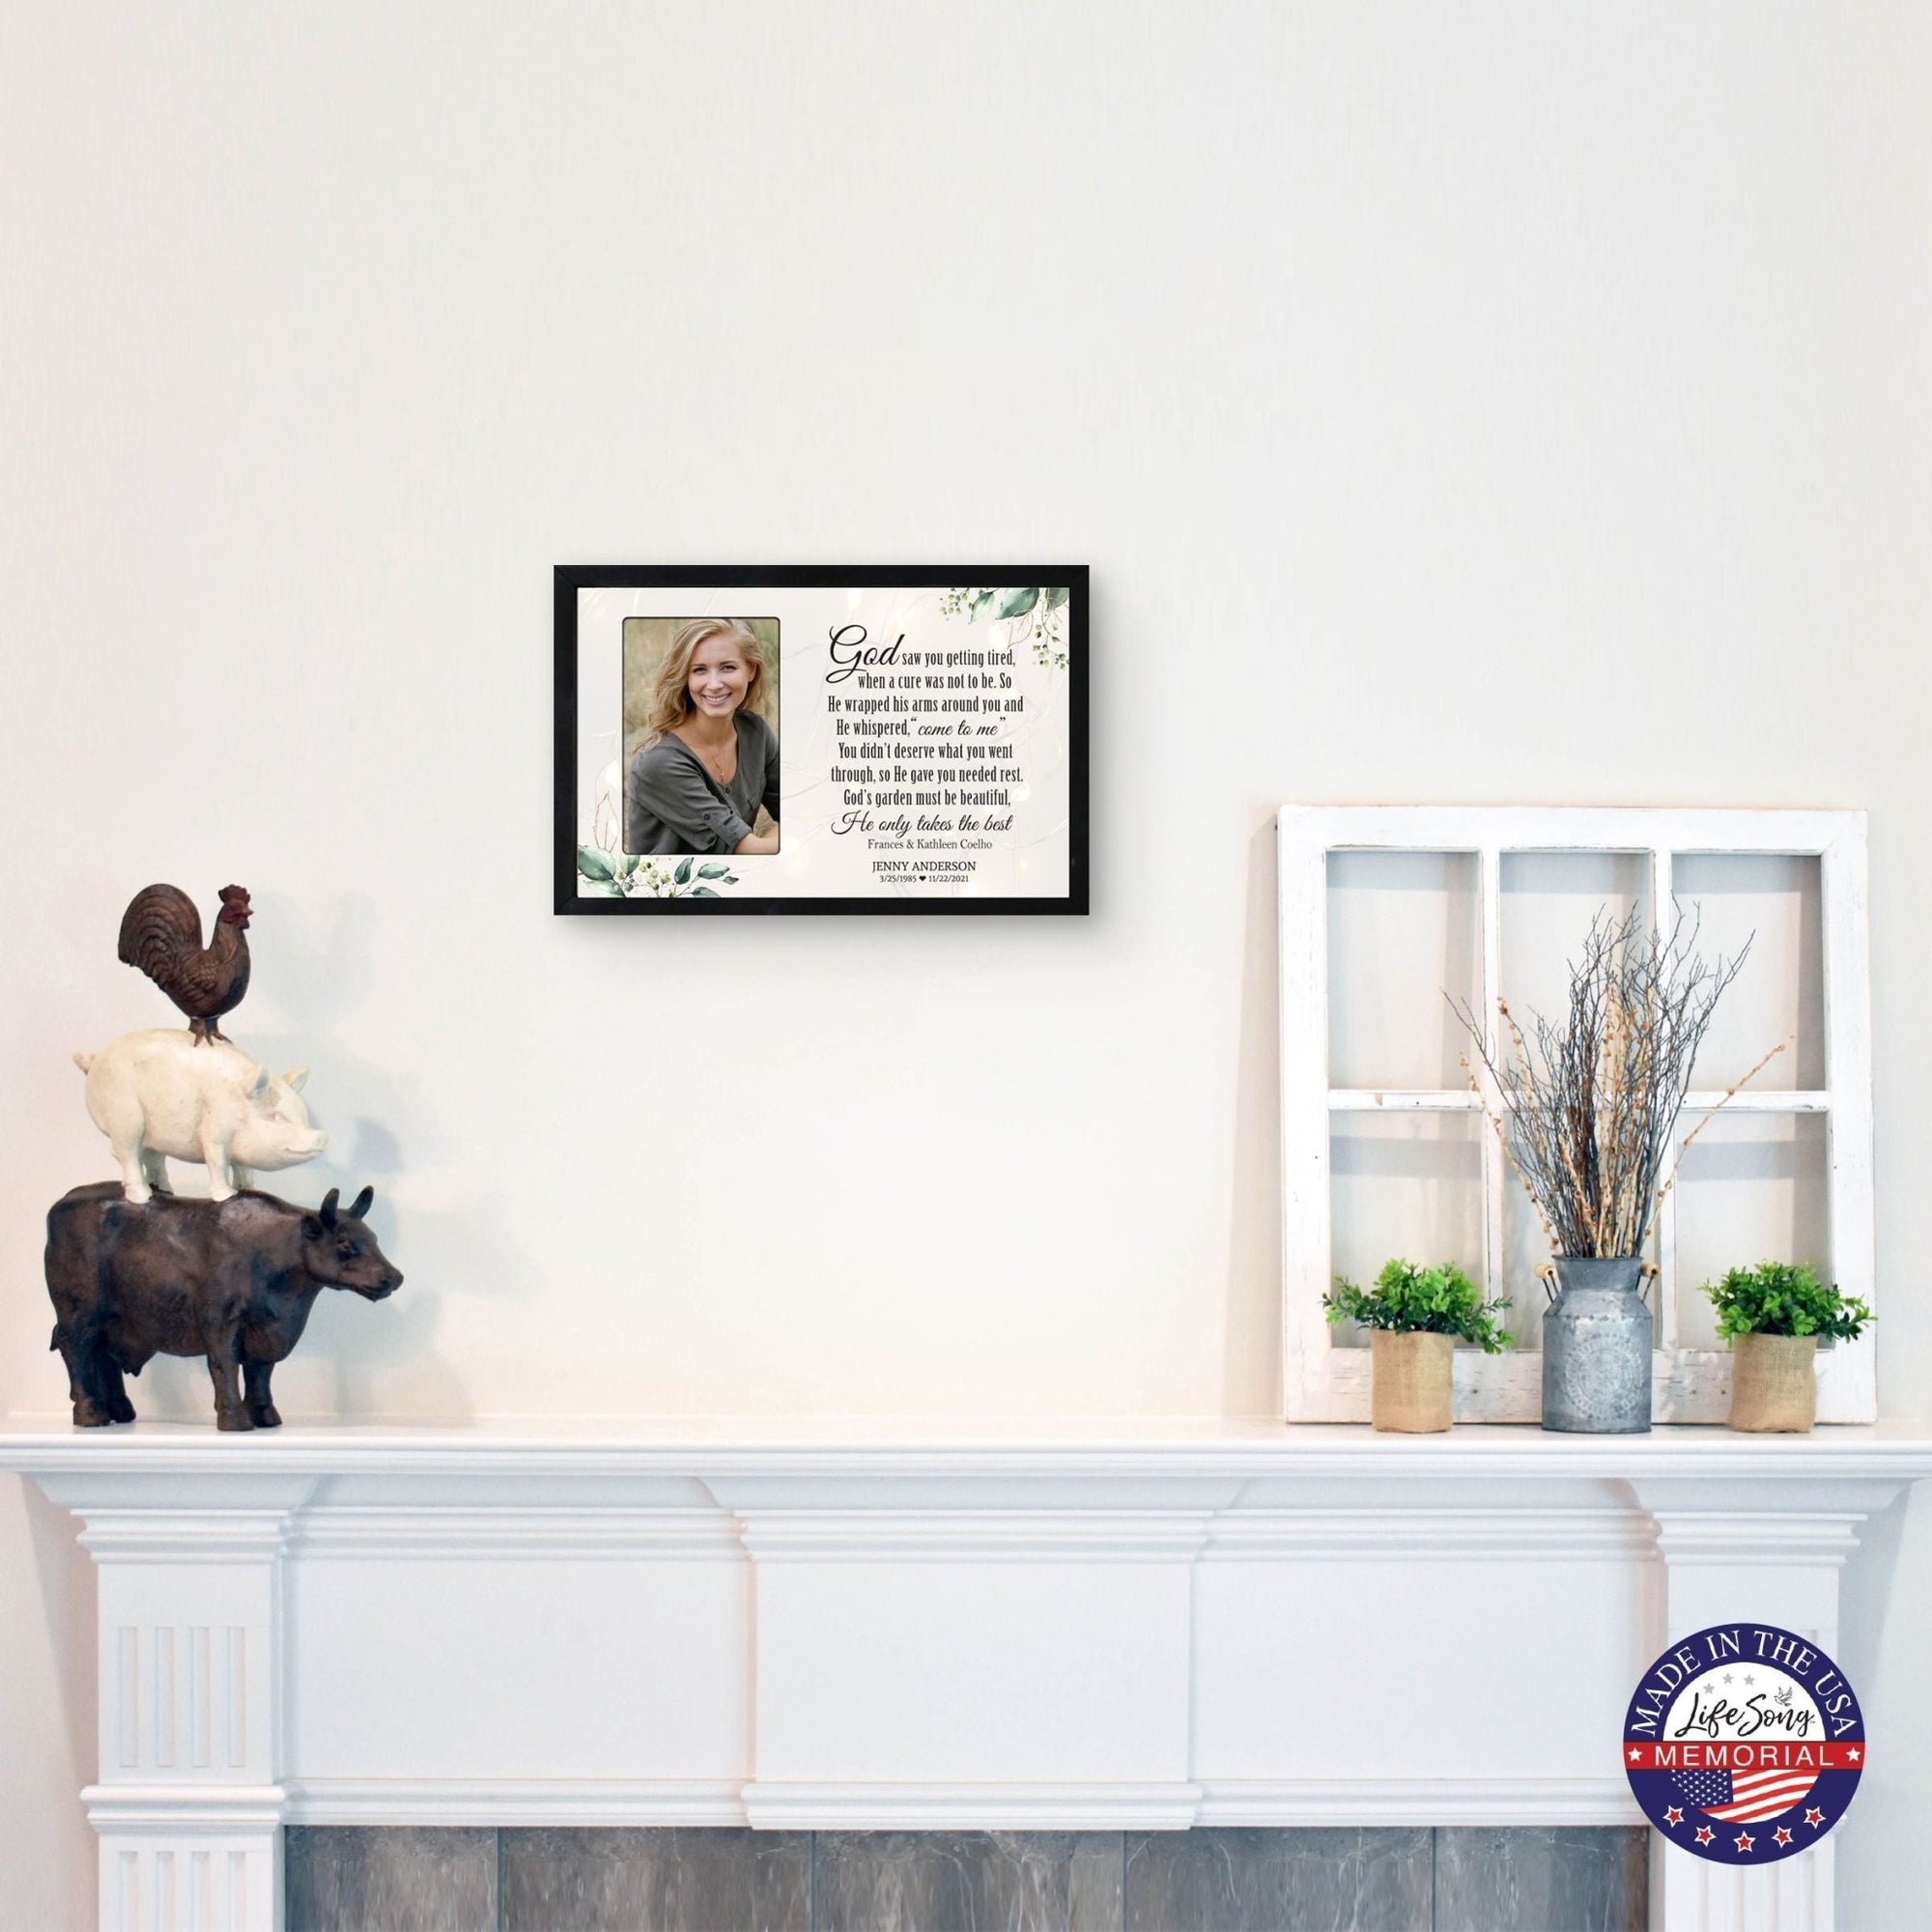 Personalized Memorial Black Framed Shadow Box With Lights Sympathy Gift Wall Décor - God Saw You Getting Tired - LifeSong Milestones